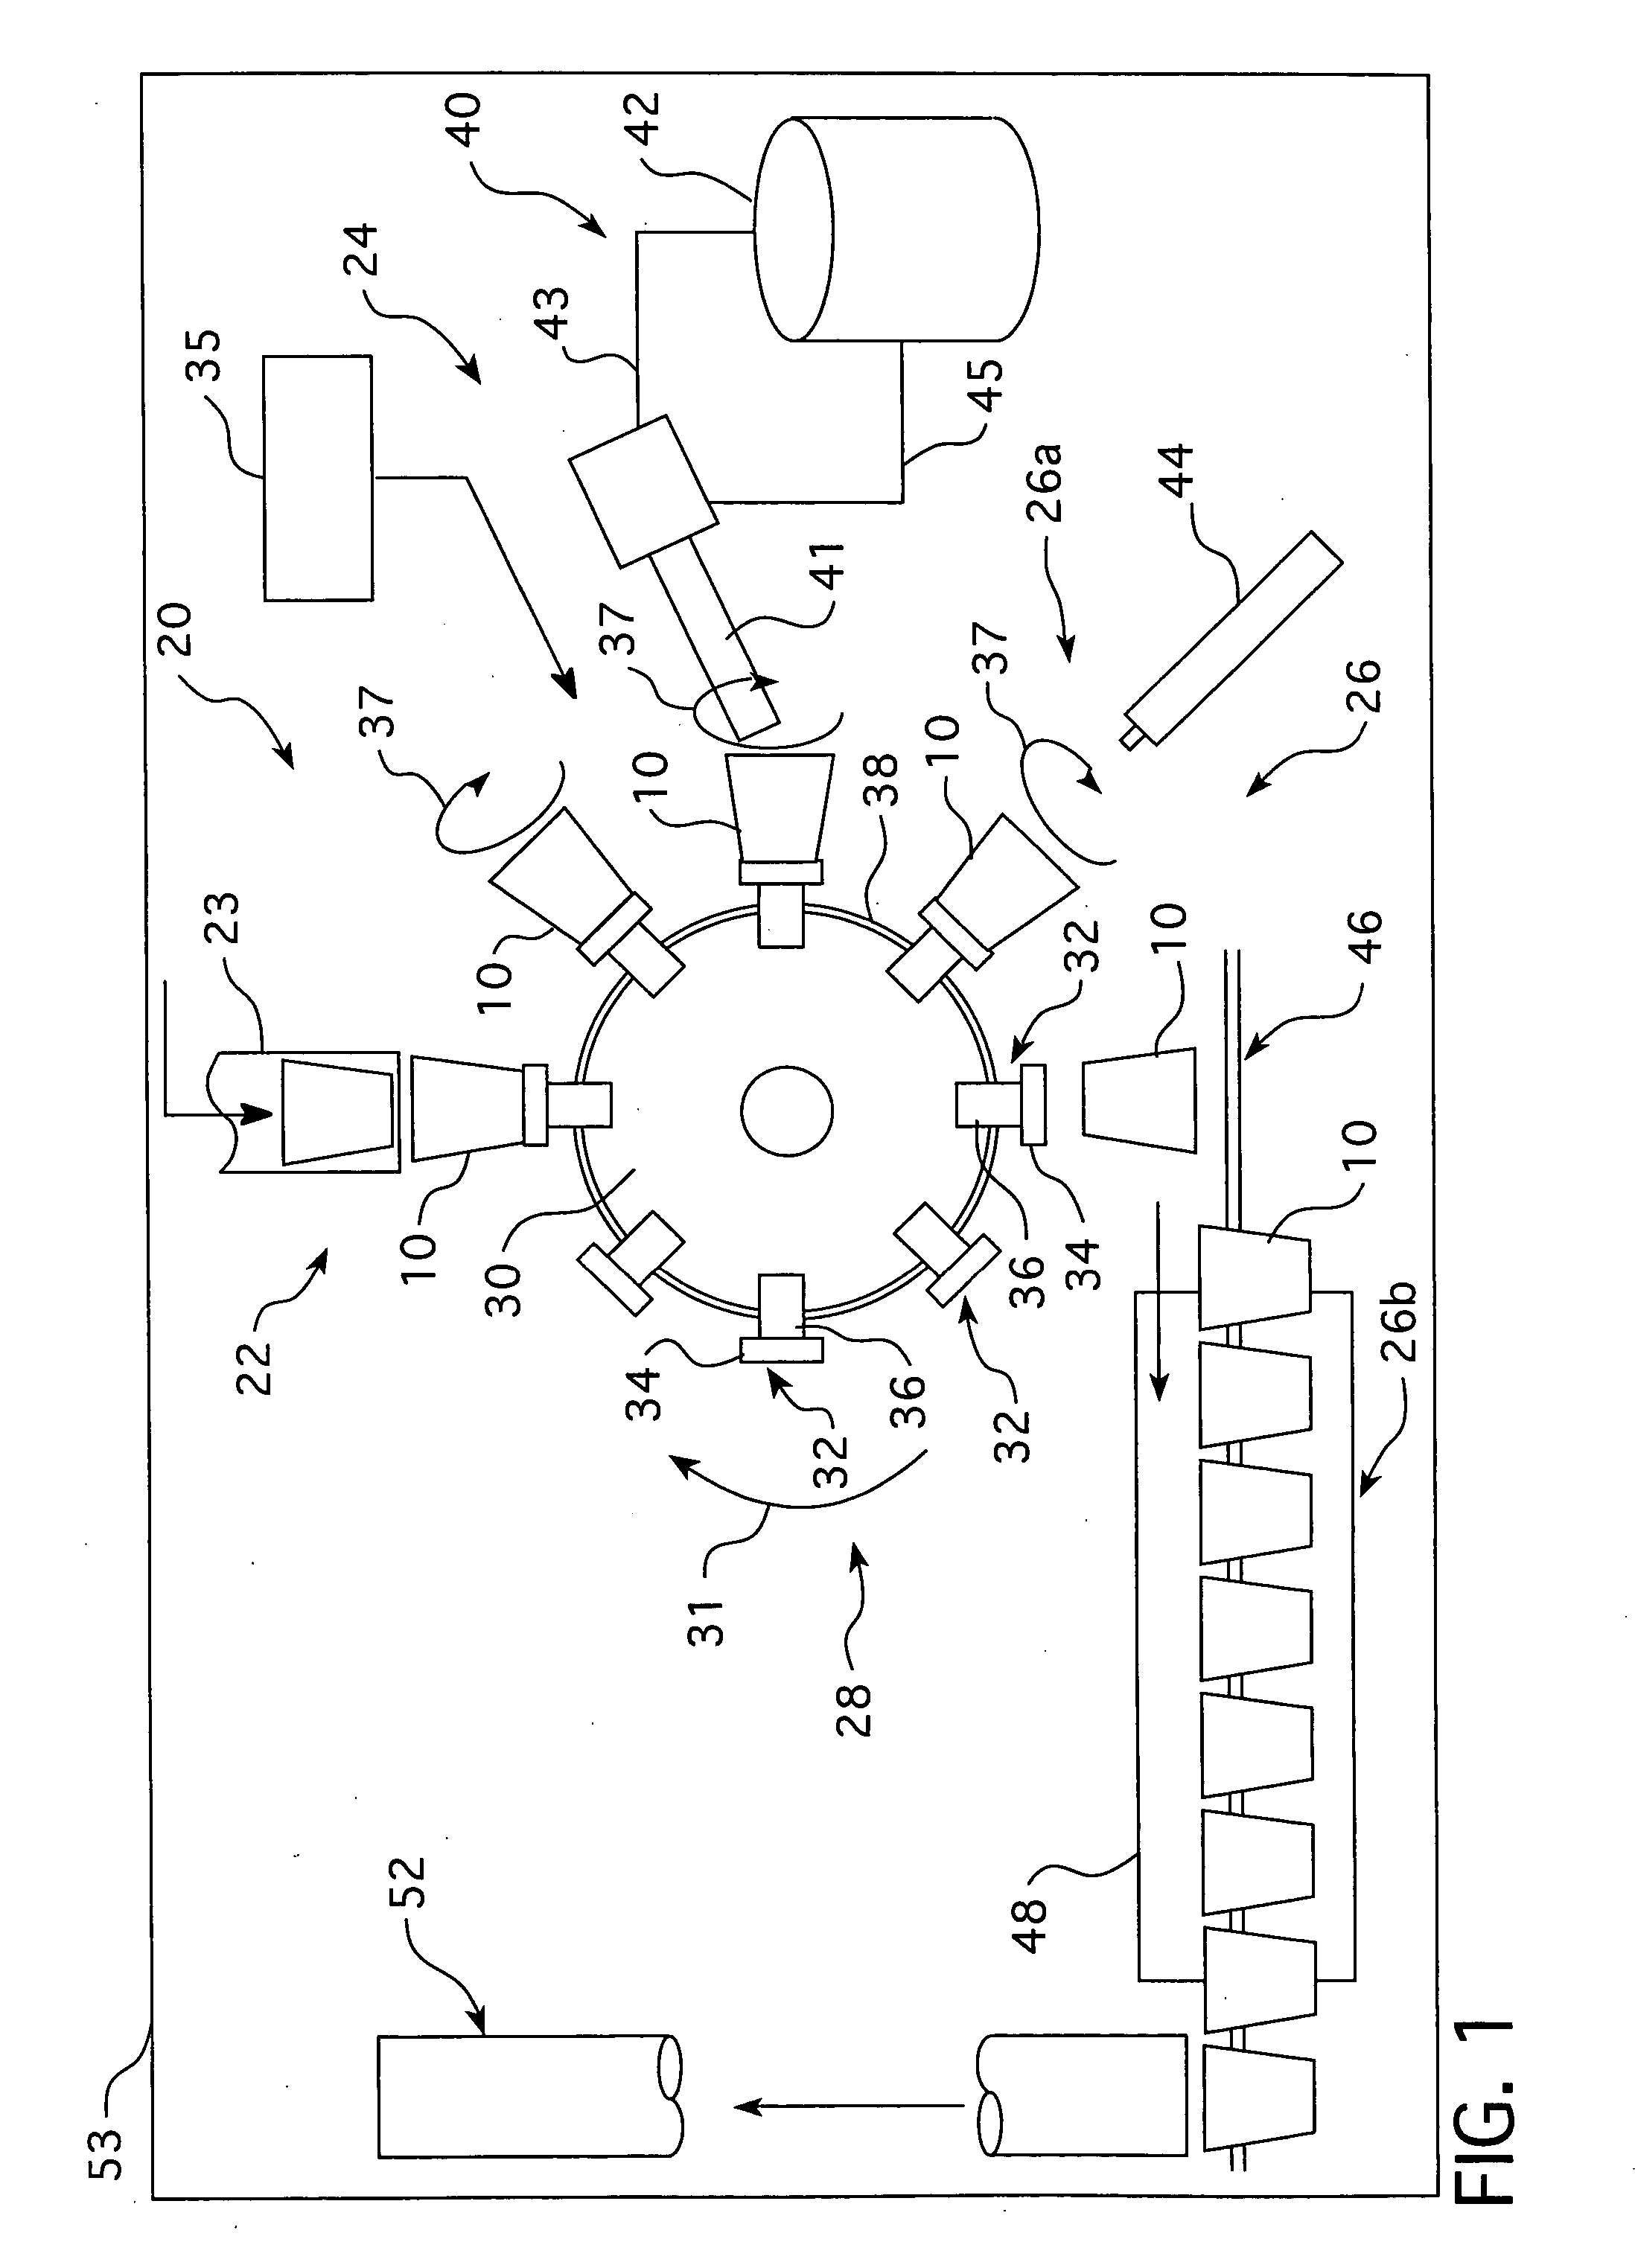 System, apparatus and process for coating and curing disposable containers